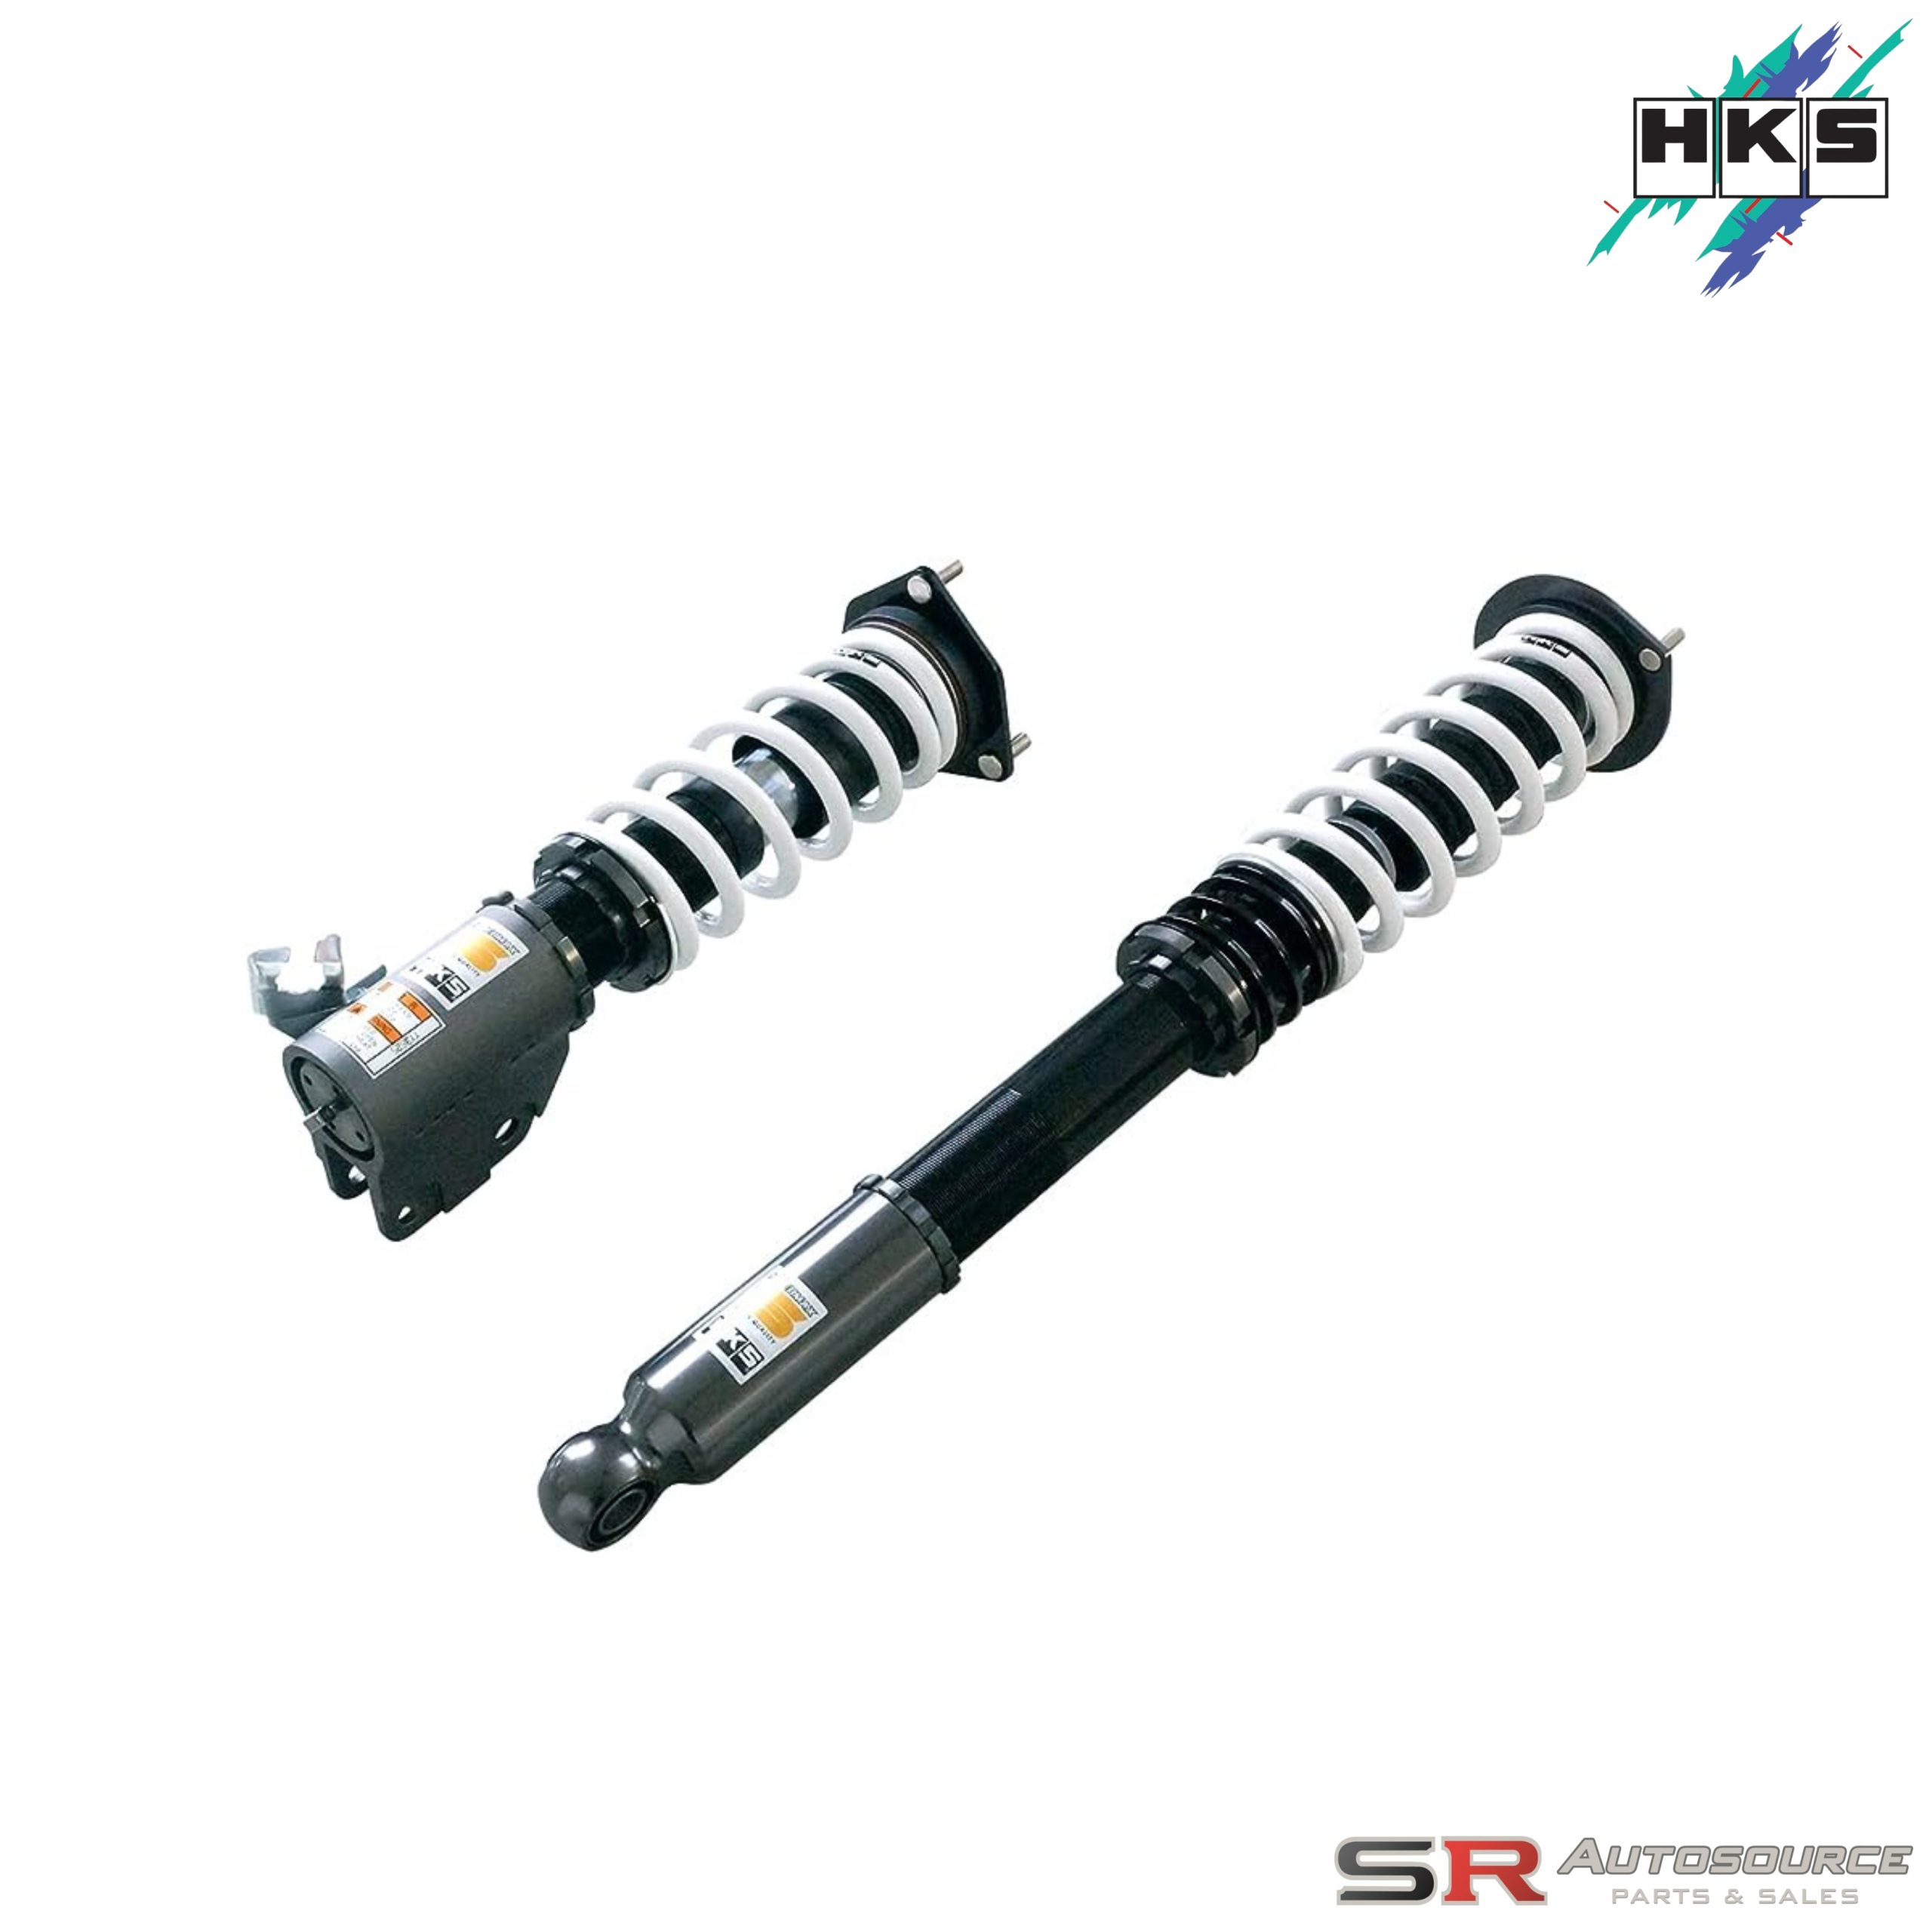 HKS Hipermax S Coilover Suspension Kit Silvia S14 and S15